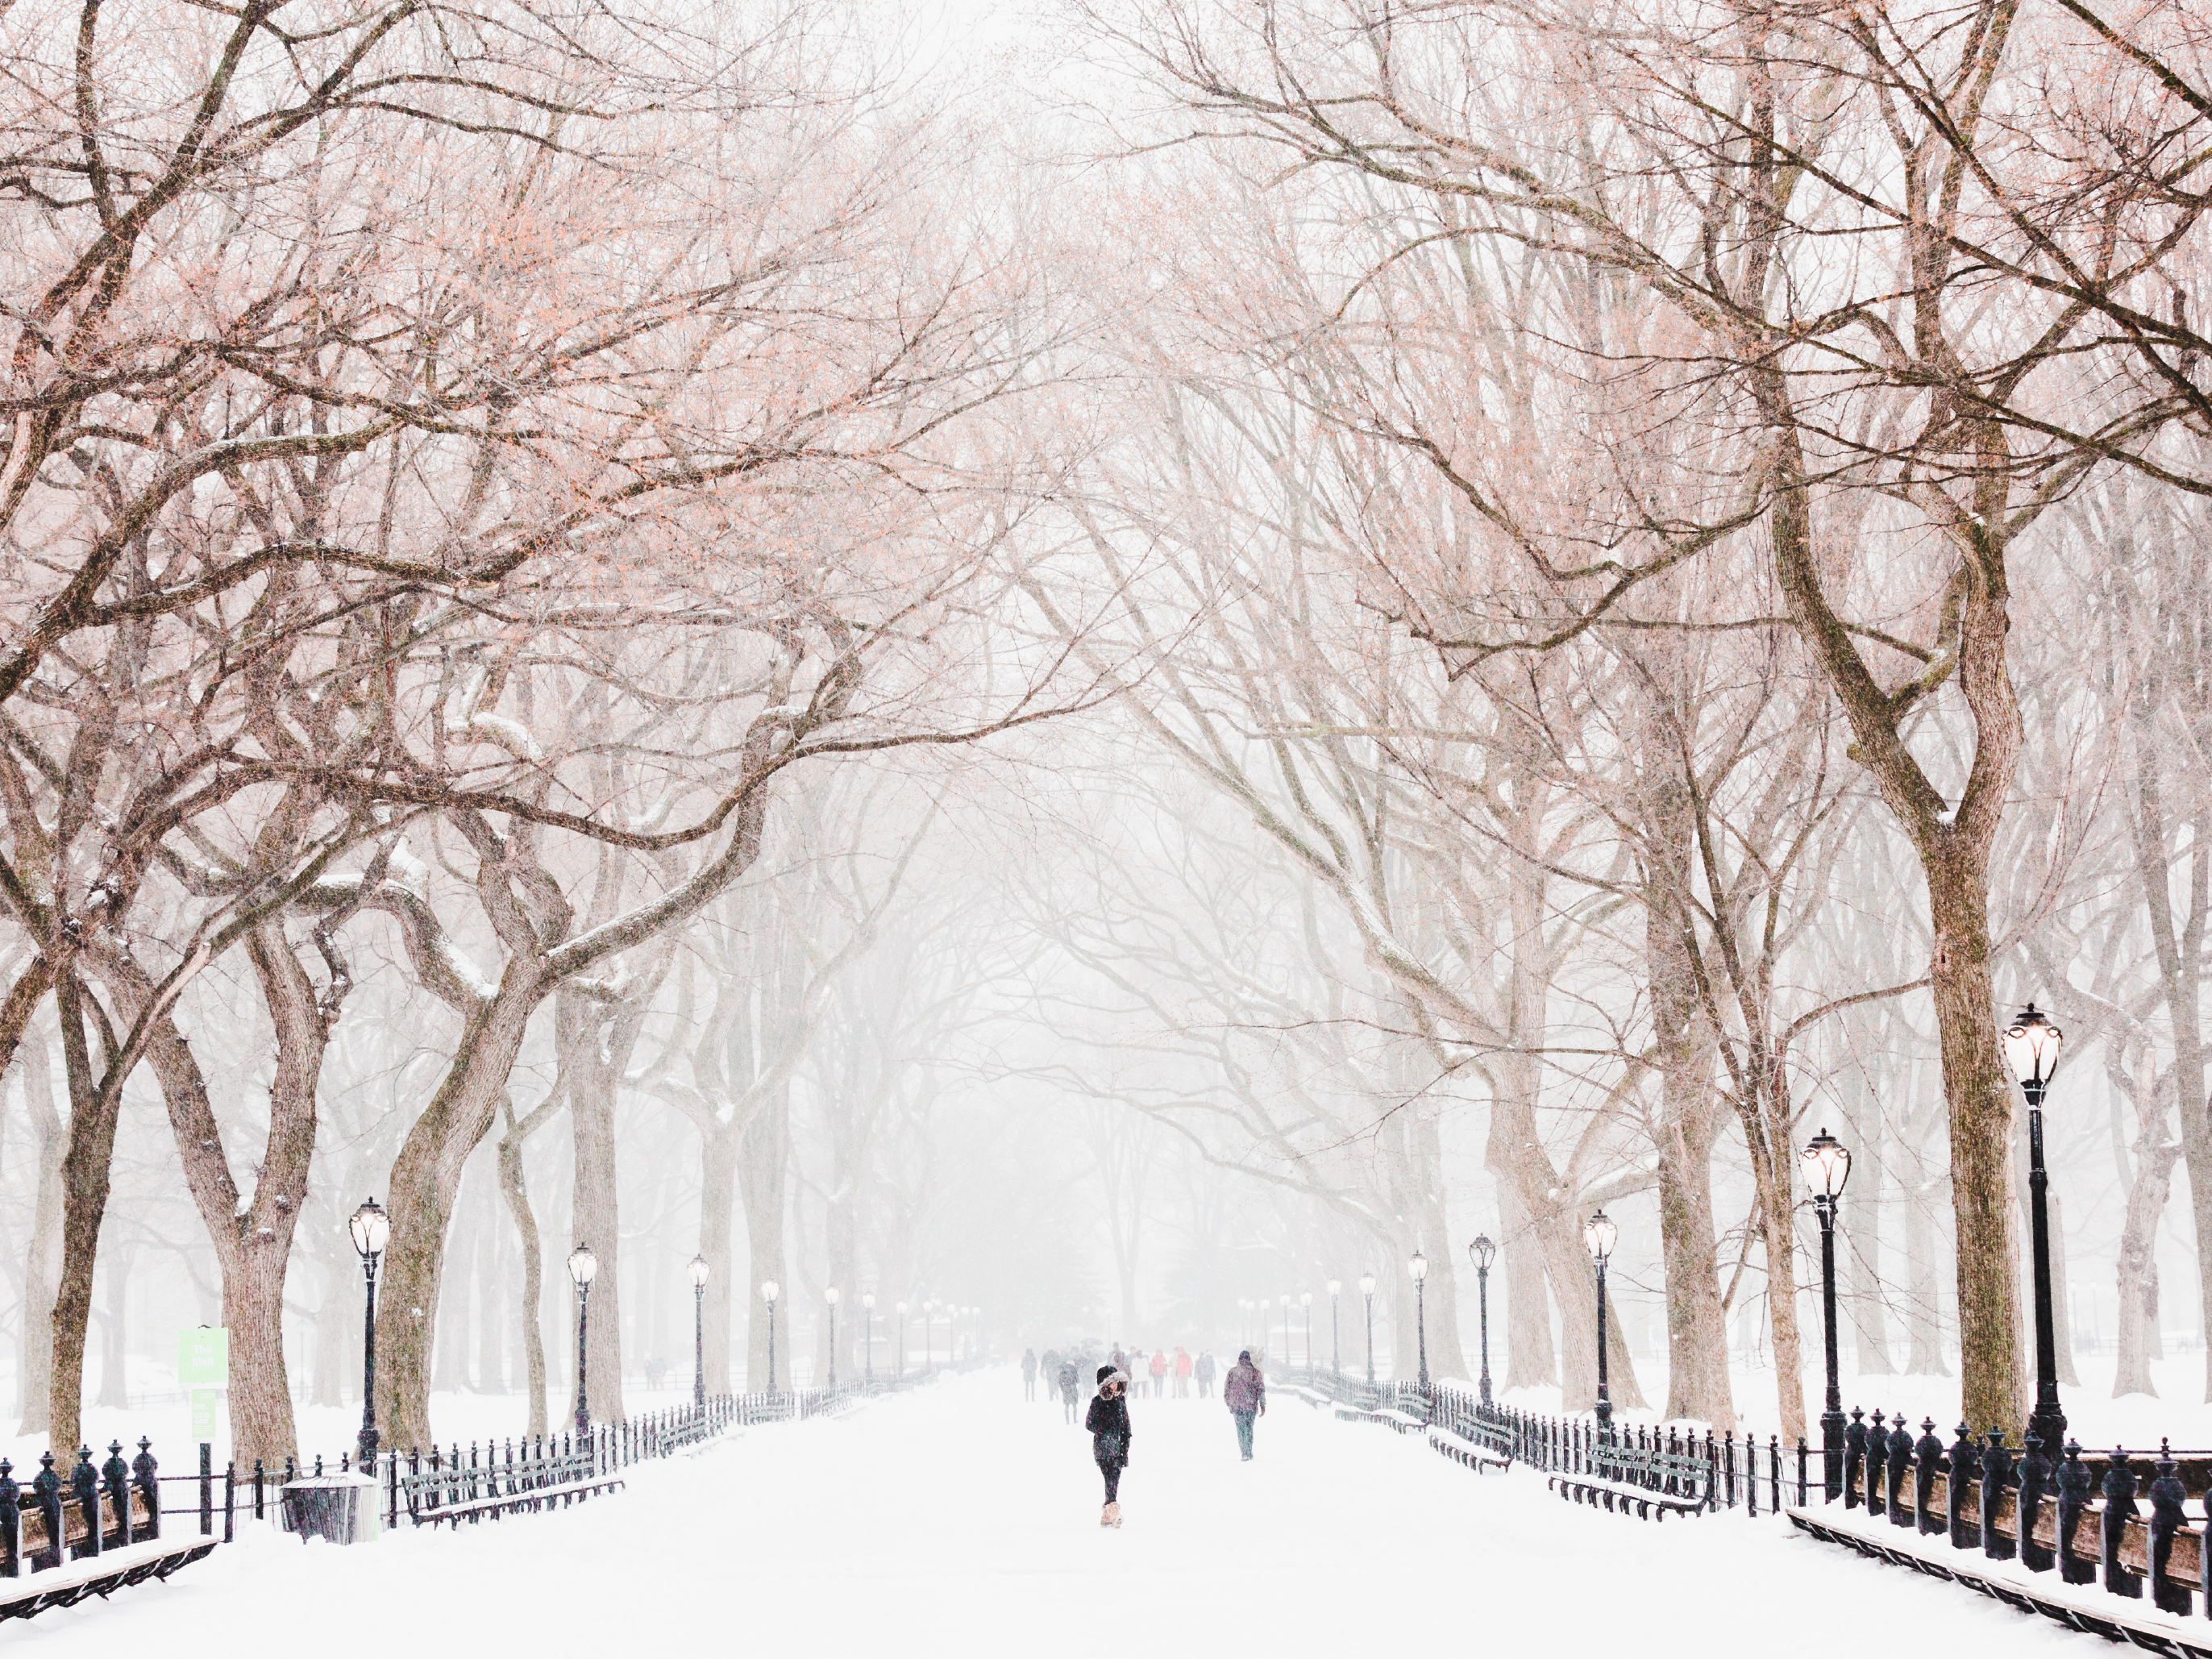 snowy path in central park - visual for sugar addiction hypnosis guide 